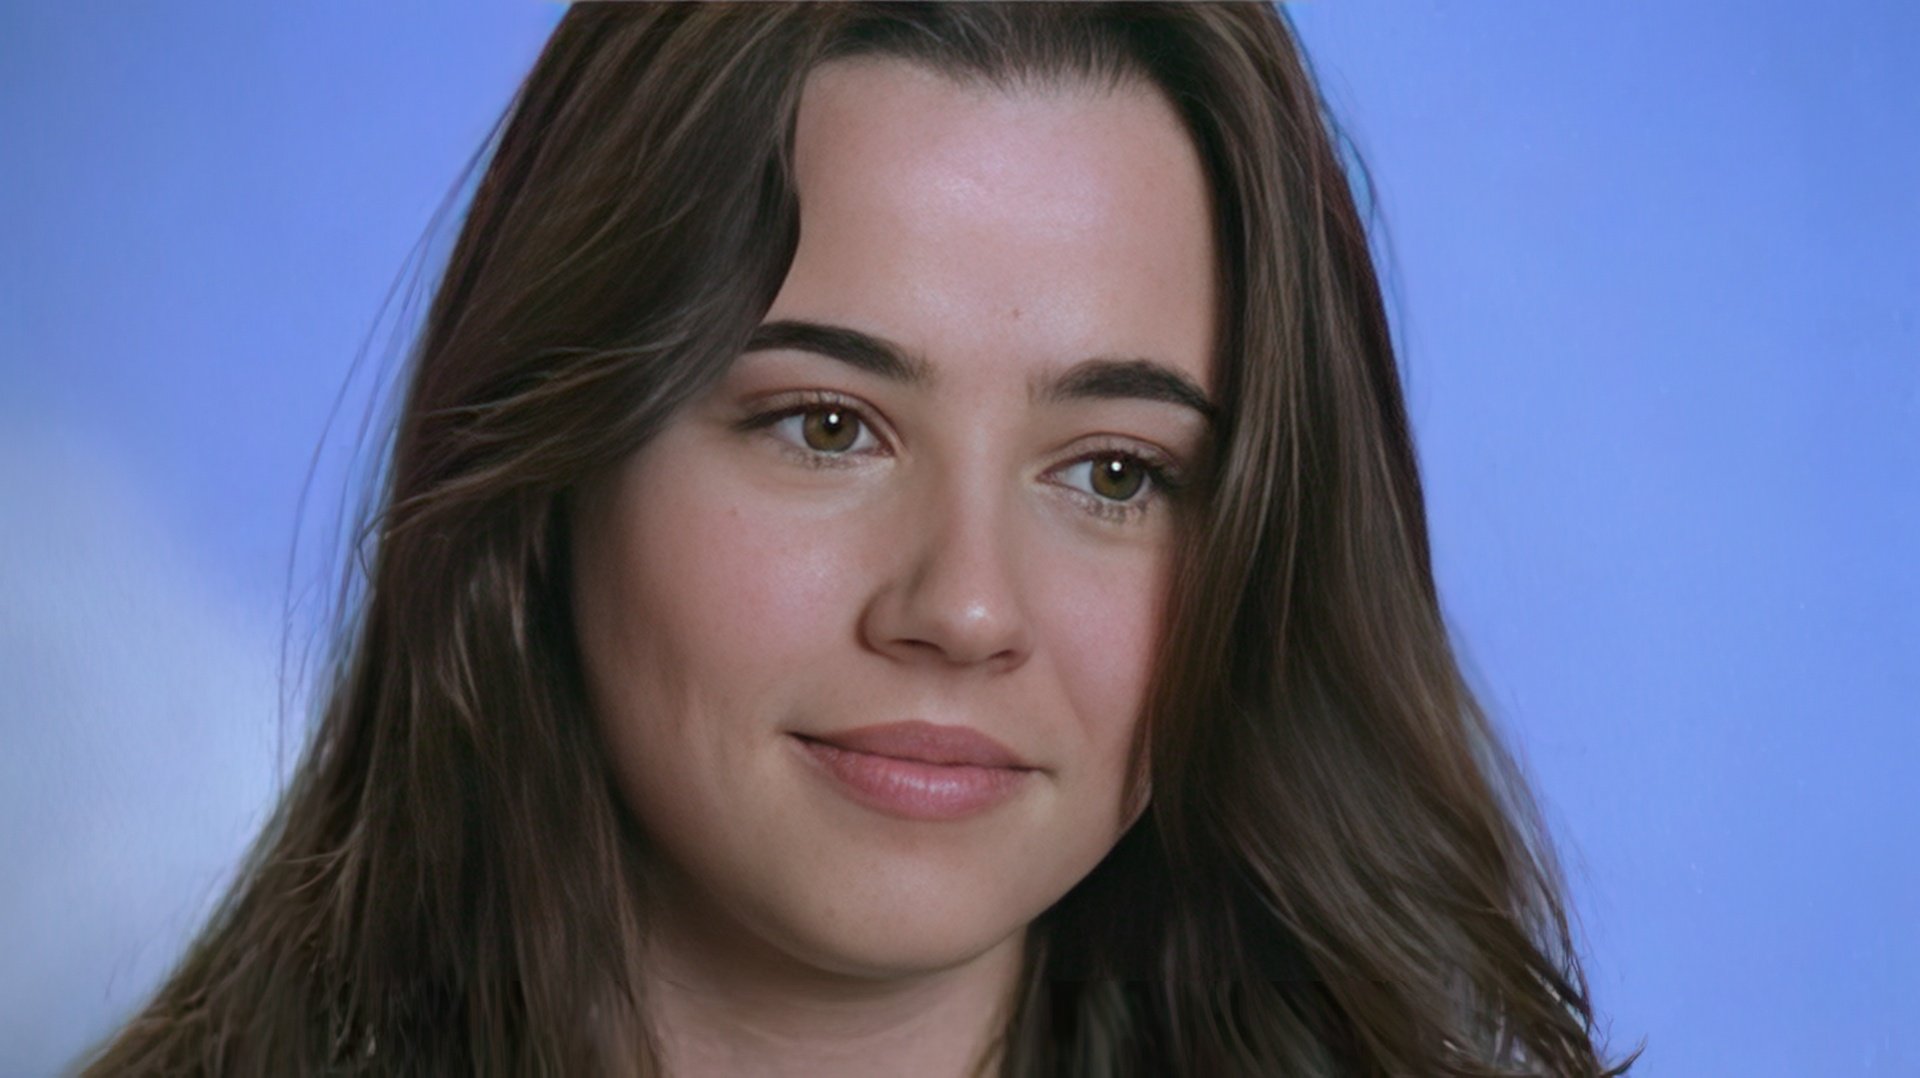 Actress Linda Cardellini in her youth